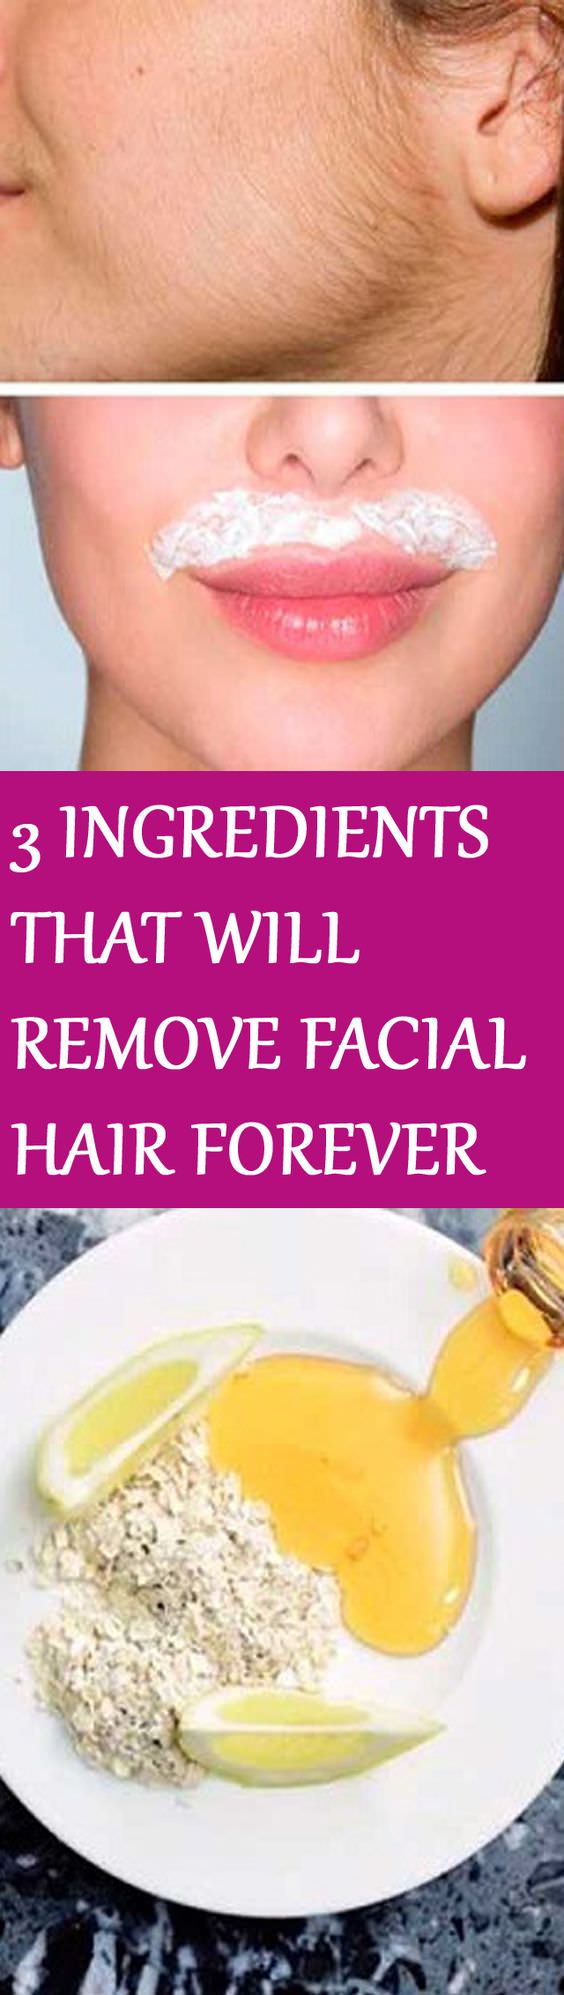 7 Natural Beauty Tricks That Will Make Your Life Easier